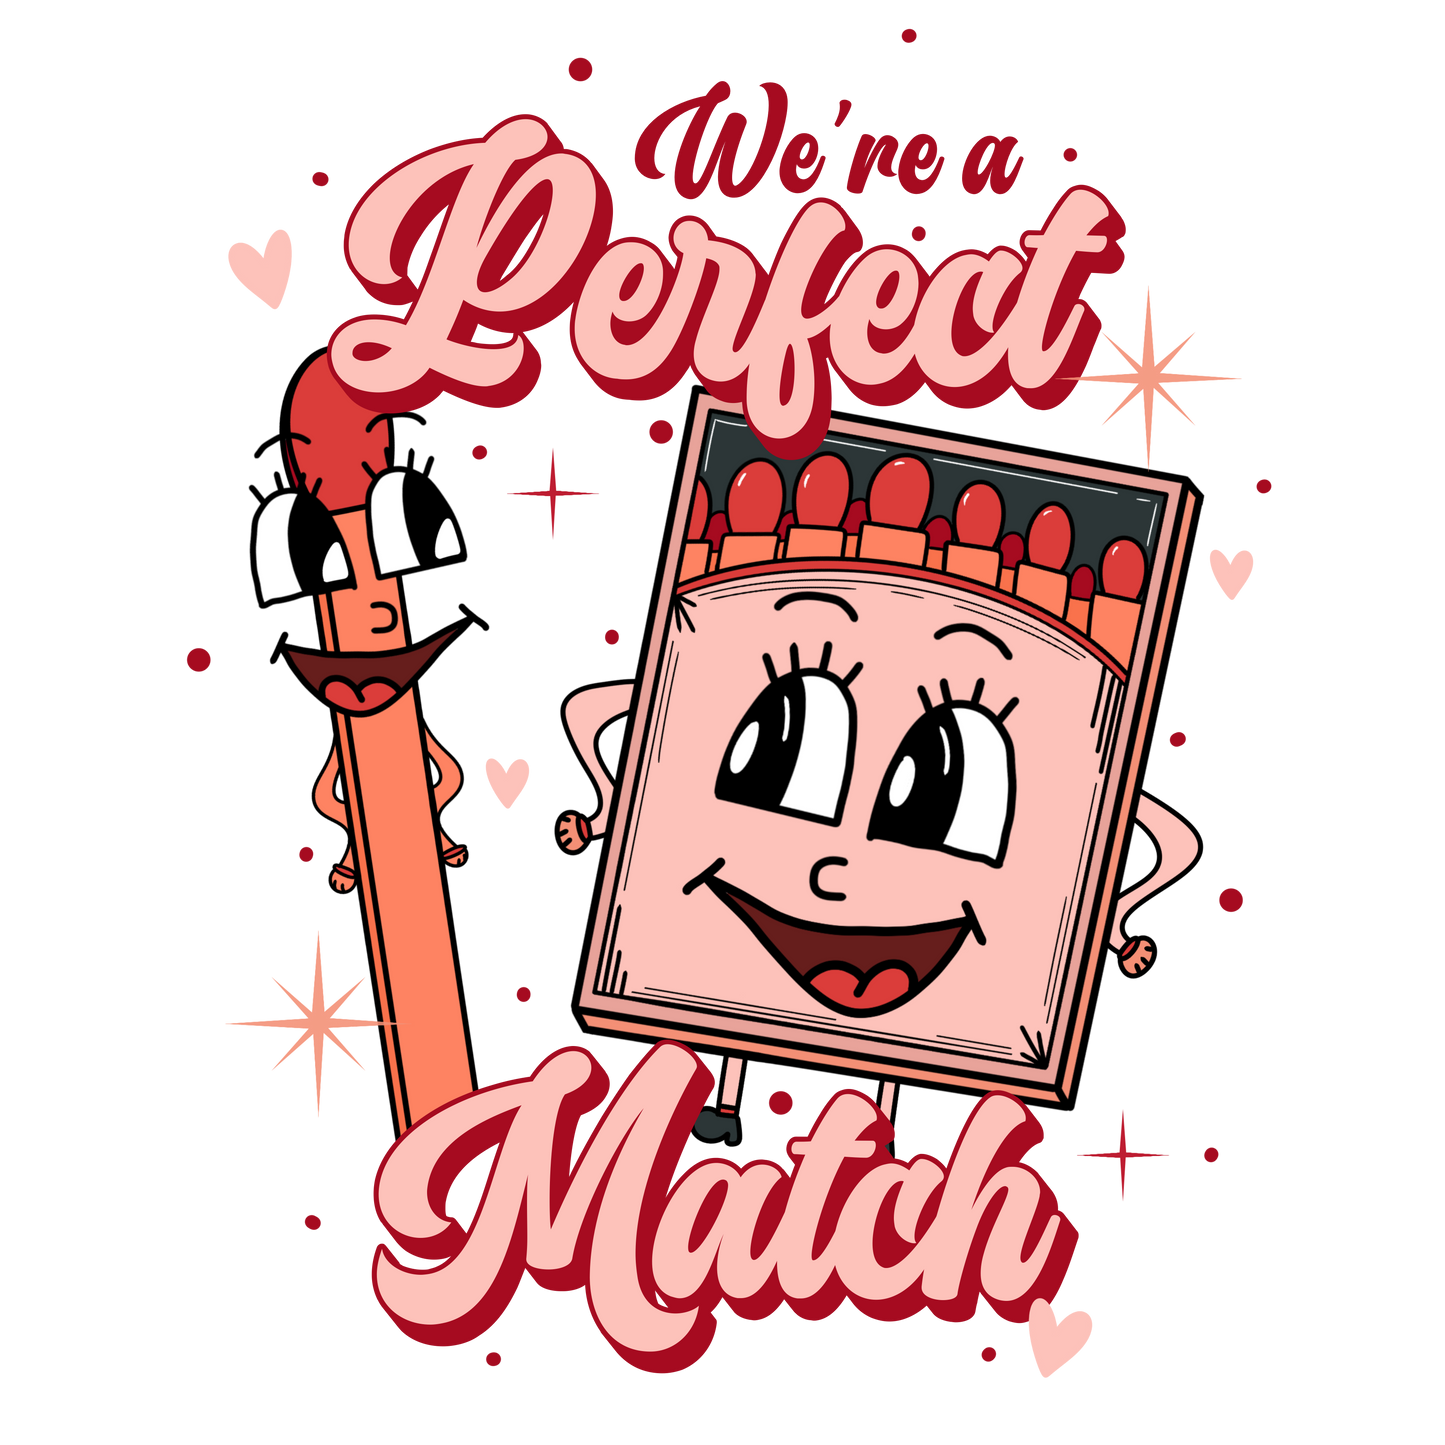 We are a perfect MATCH